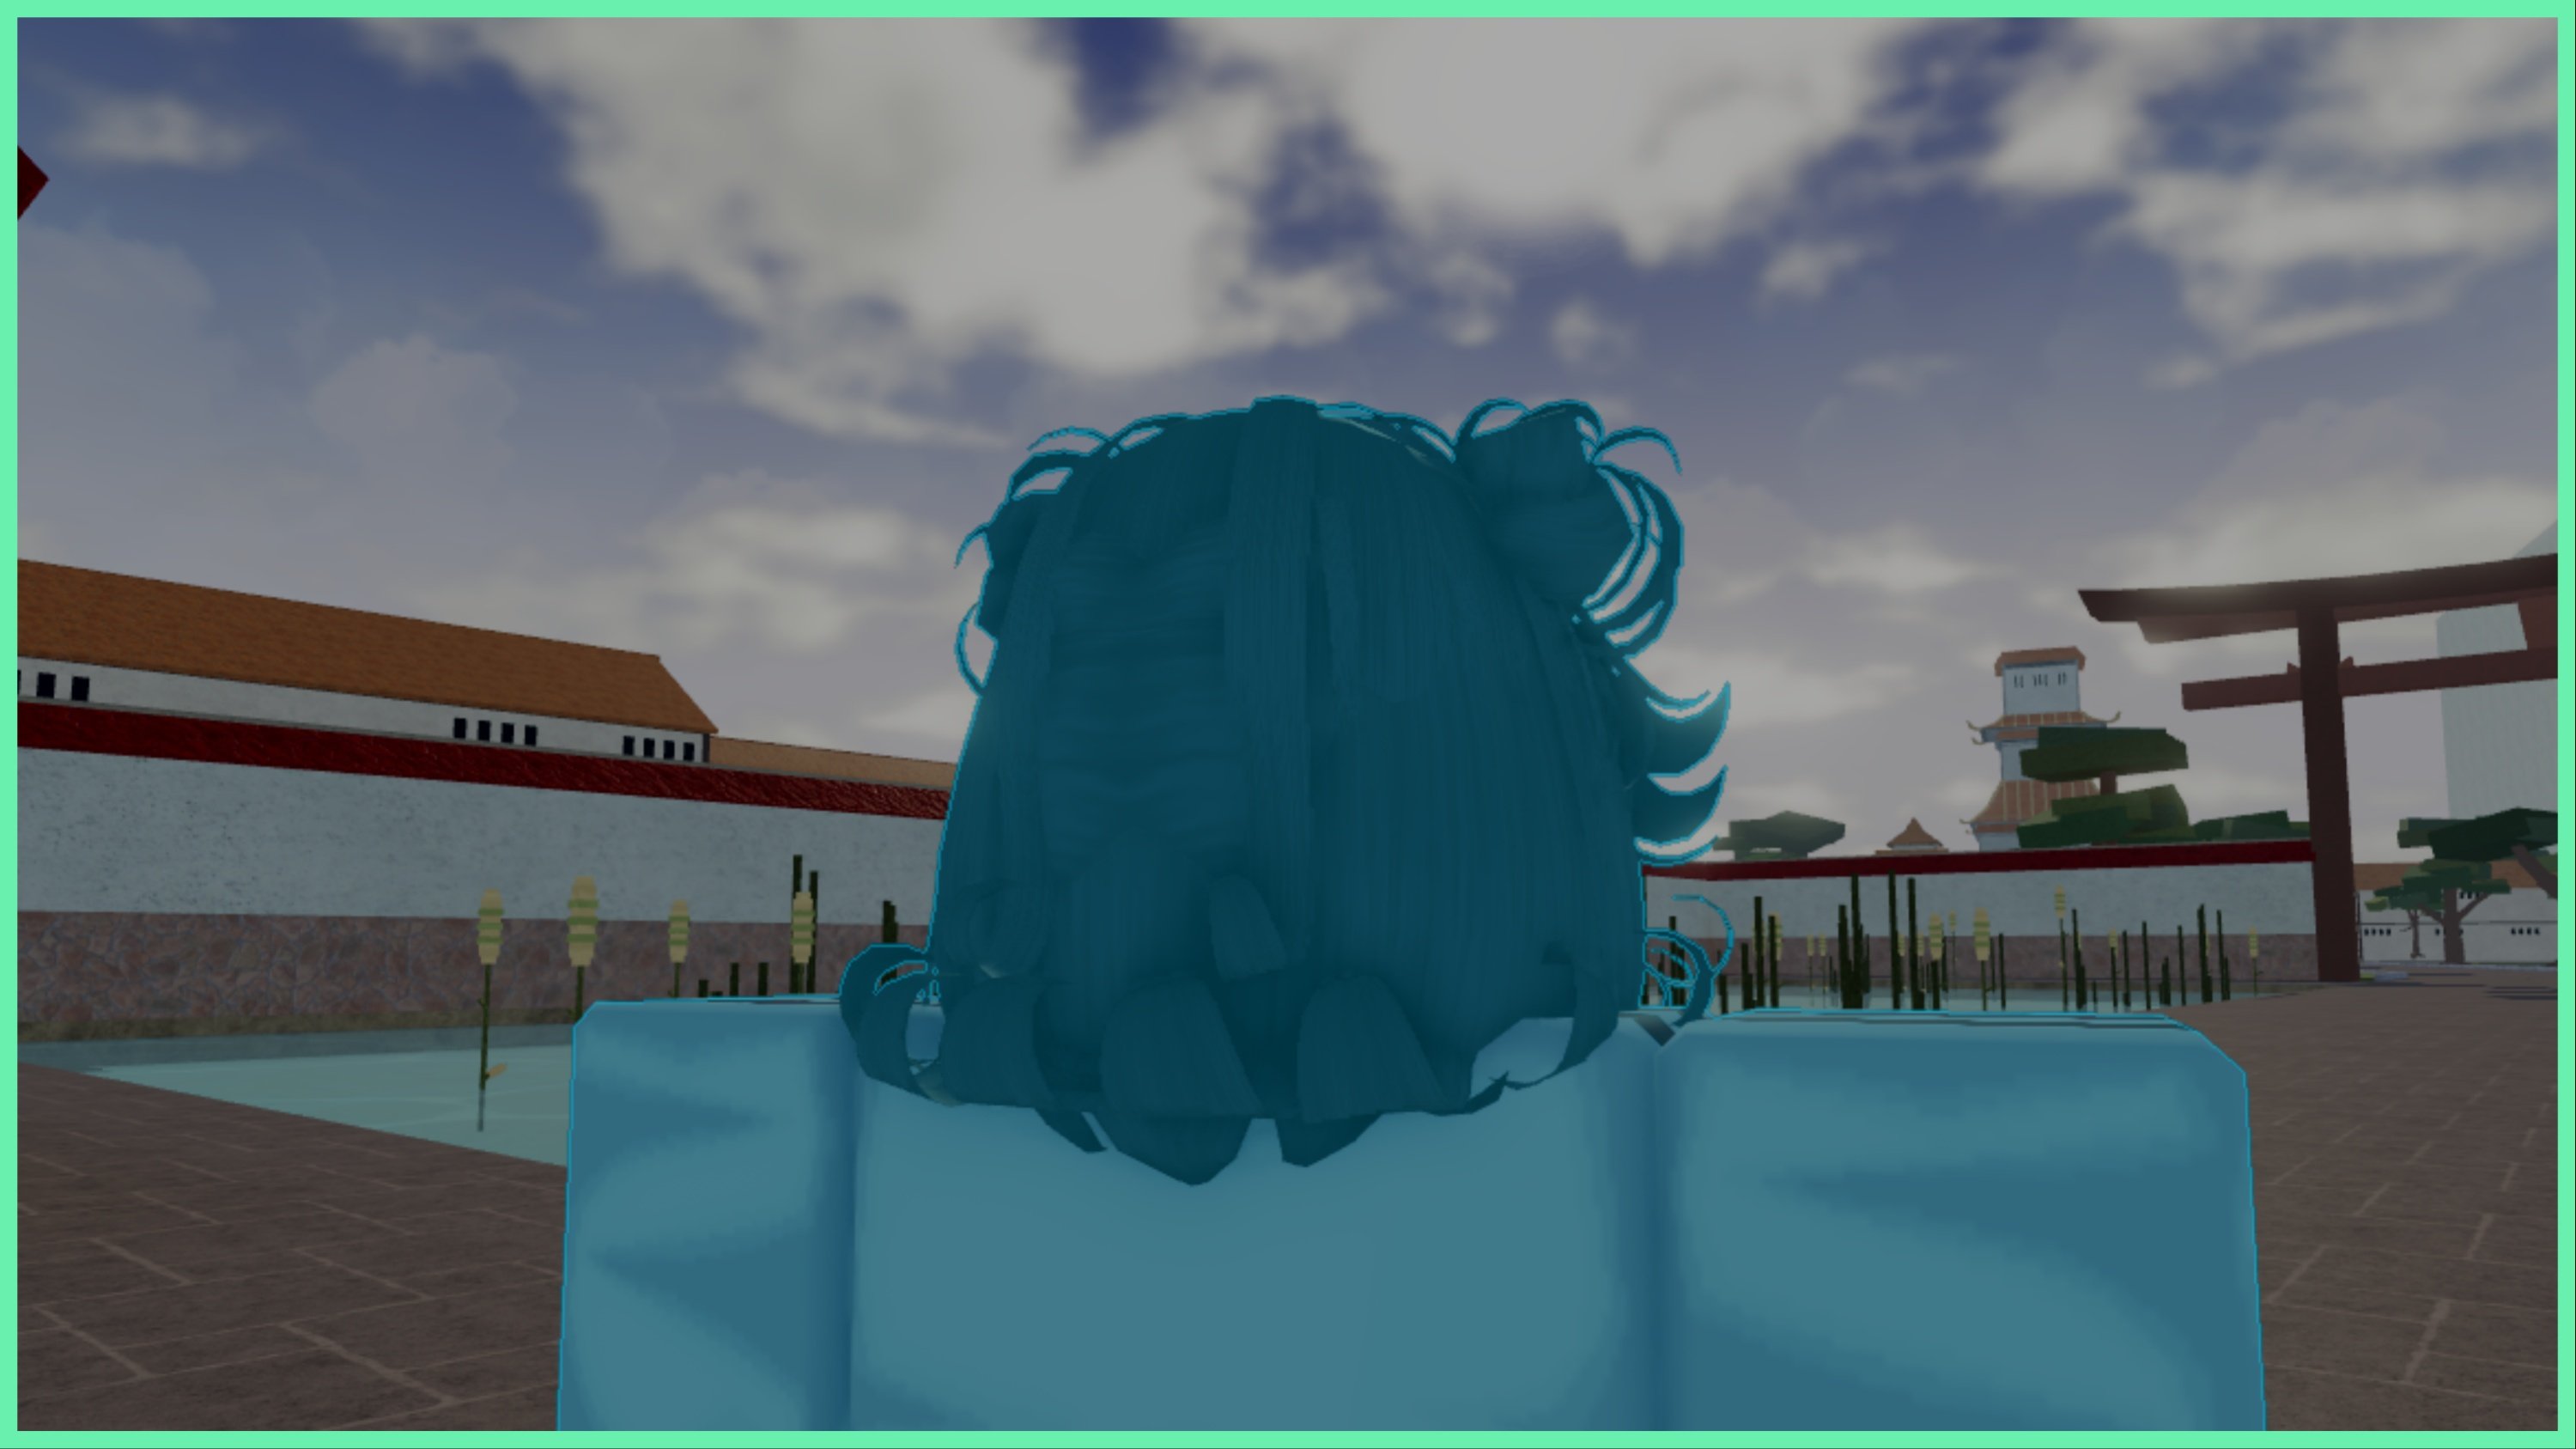 The image shows the back of my avatars head who has short black hair in messy locks. She has a blue overcasting aura surrounding her entire body and is standing in a hub for shikigamis. In the distance is a large white wall with connecting buildings just beneath the sunset skyline